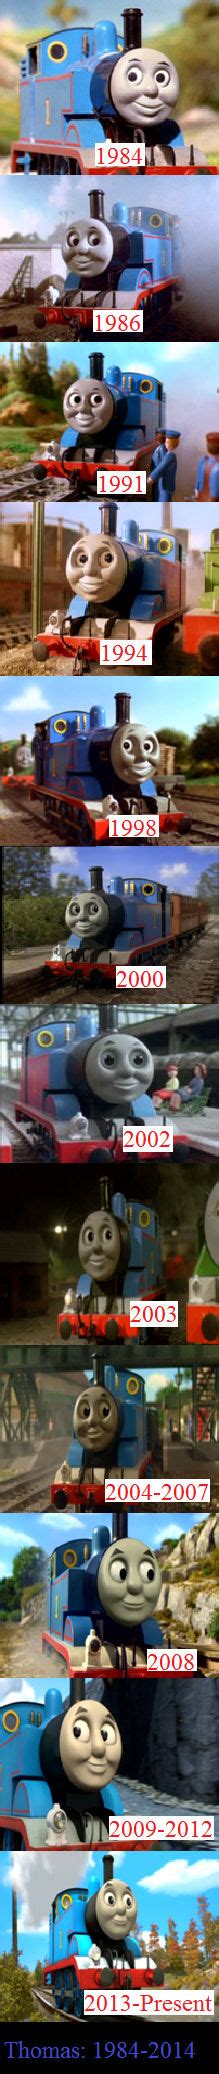 30 Years Of Thomas By Trainmaster97 On Deviantart